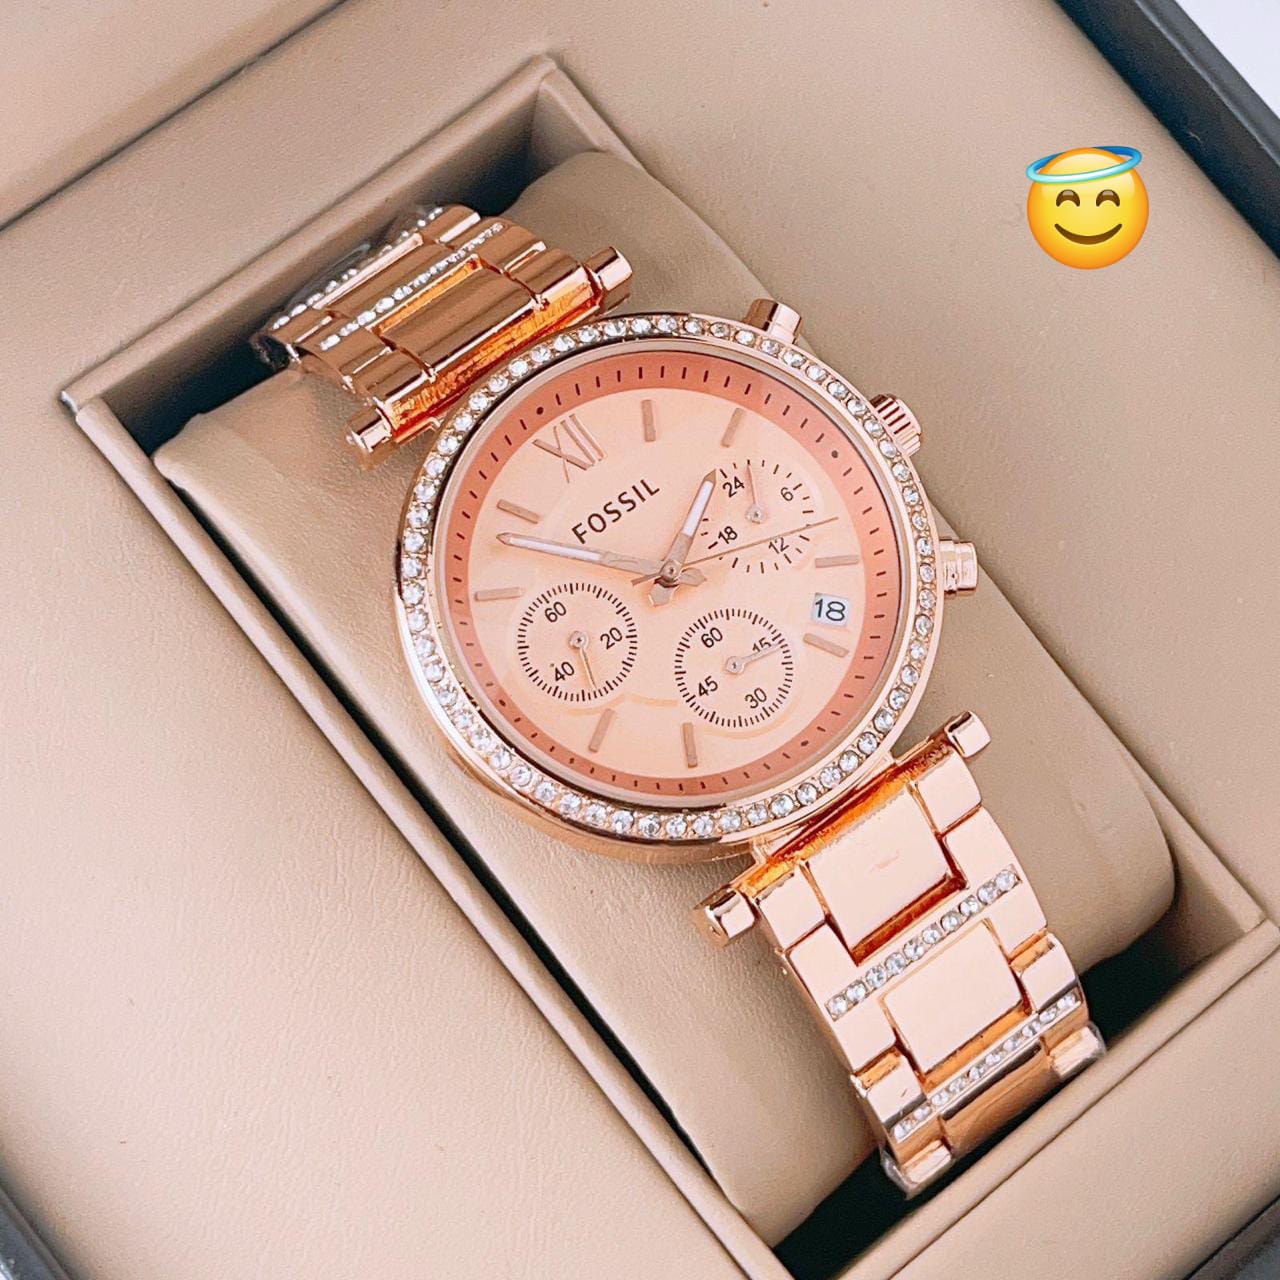 Fossil Ladies Watch